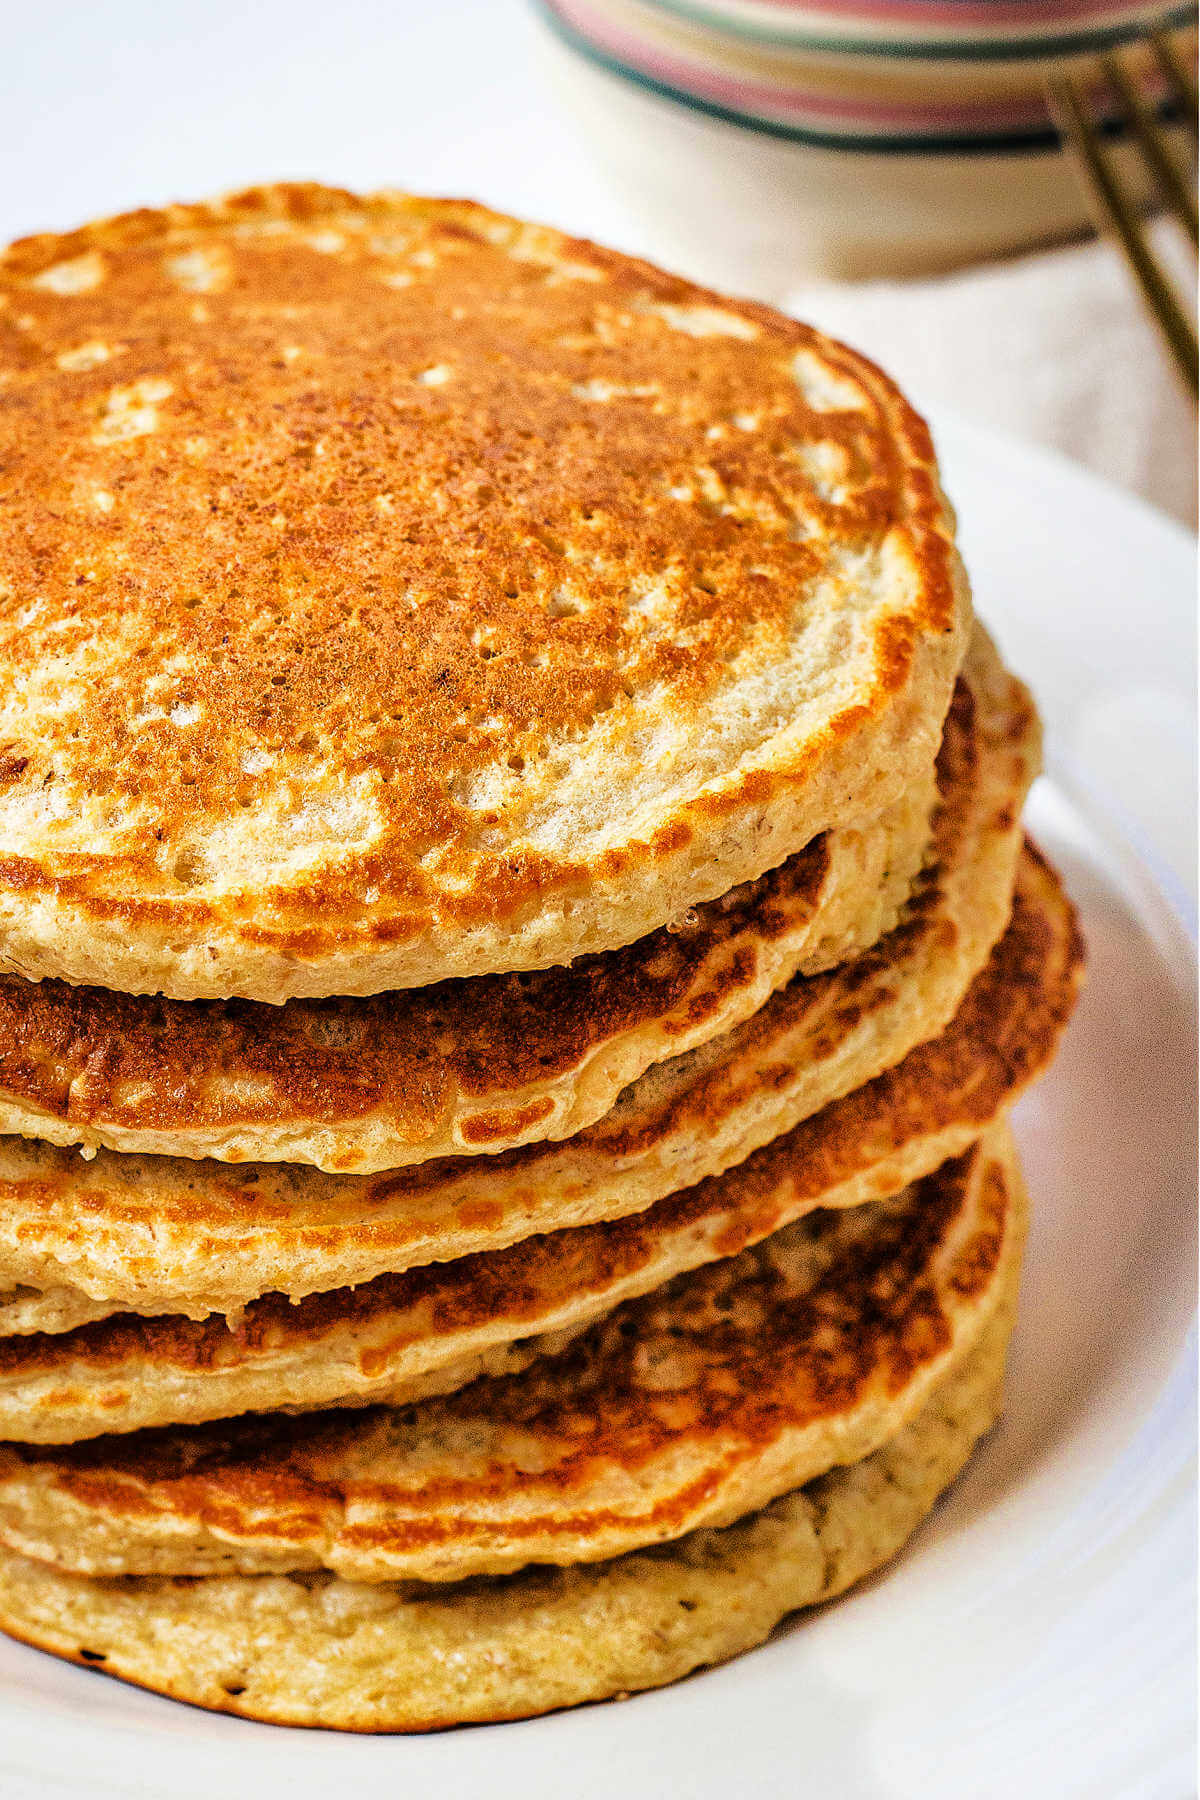 Close up image of a stack of oat flour pancakes on a plate.